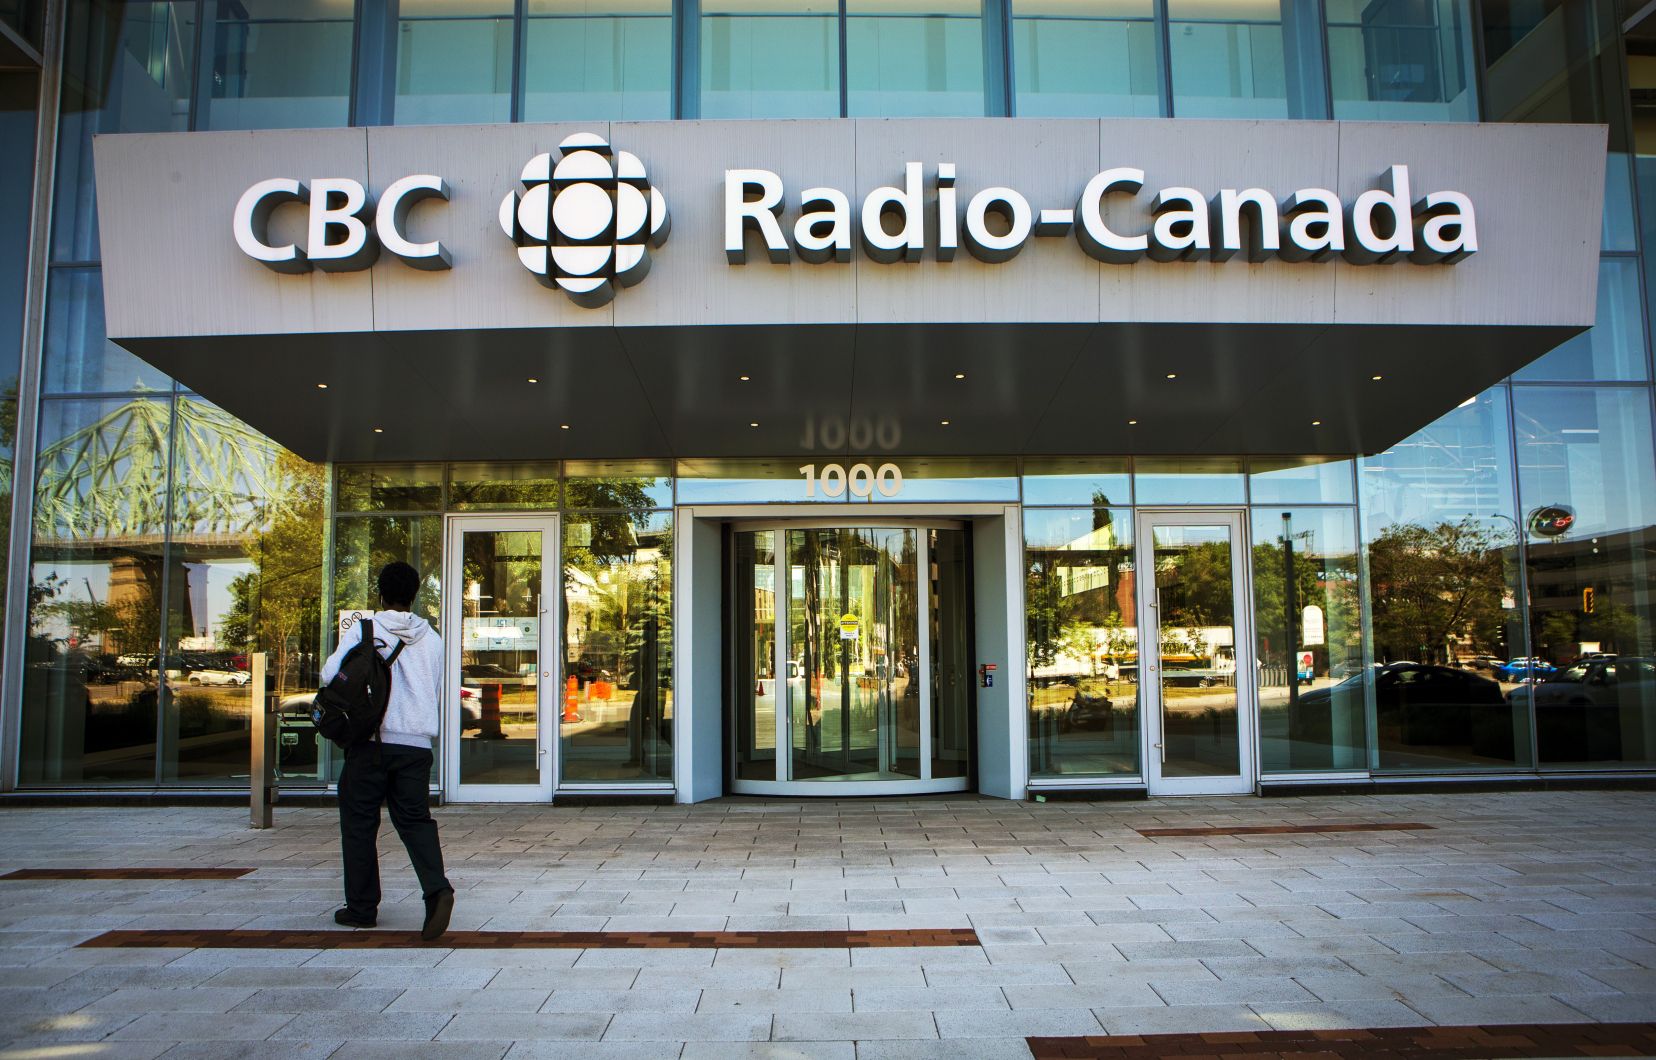 Radio Canada: Ombudsman appeals to end comments on the site

